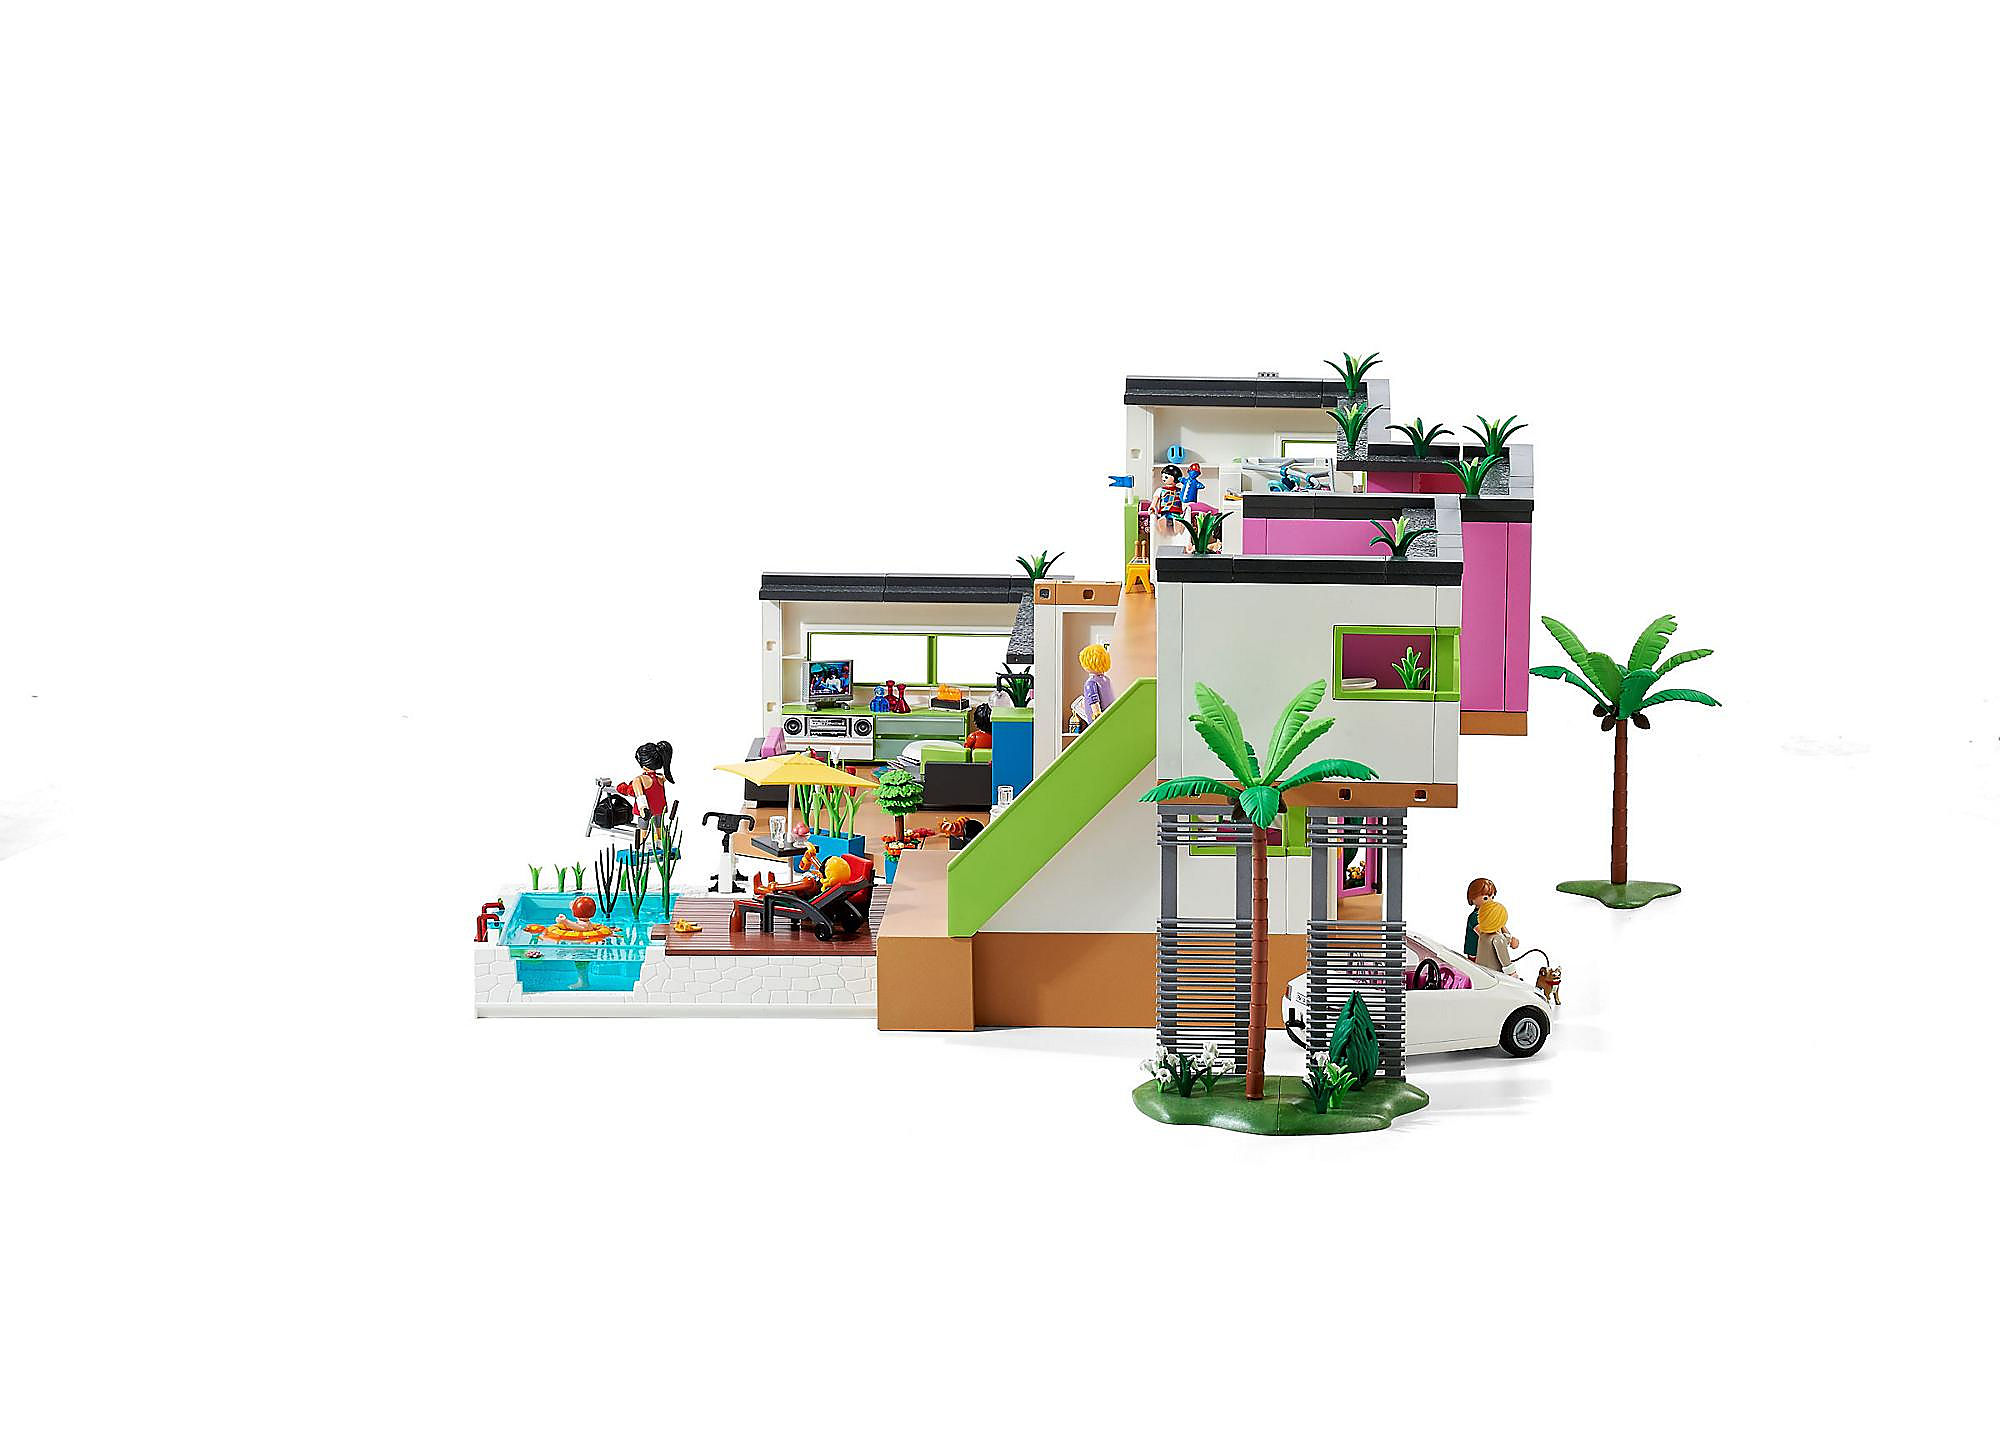 Playmobil unboxing : Modern luxury mansion (2014) - 5574, 5575